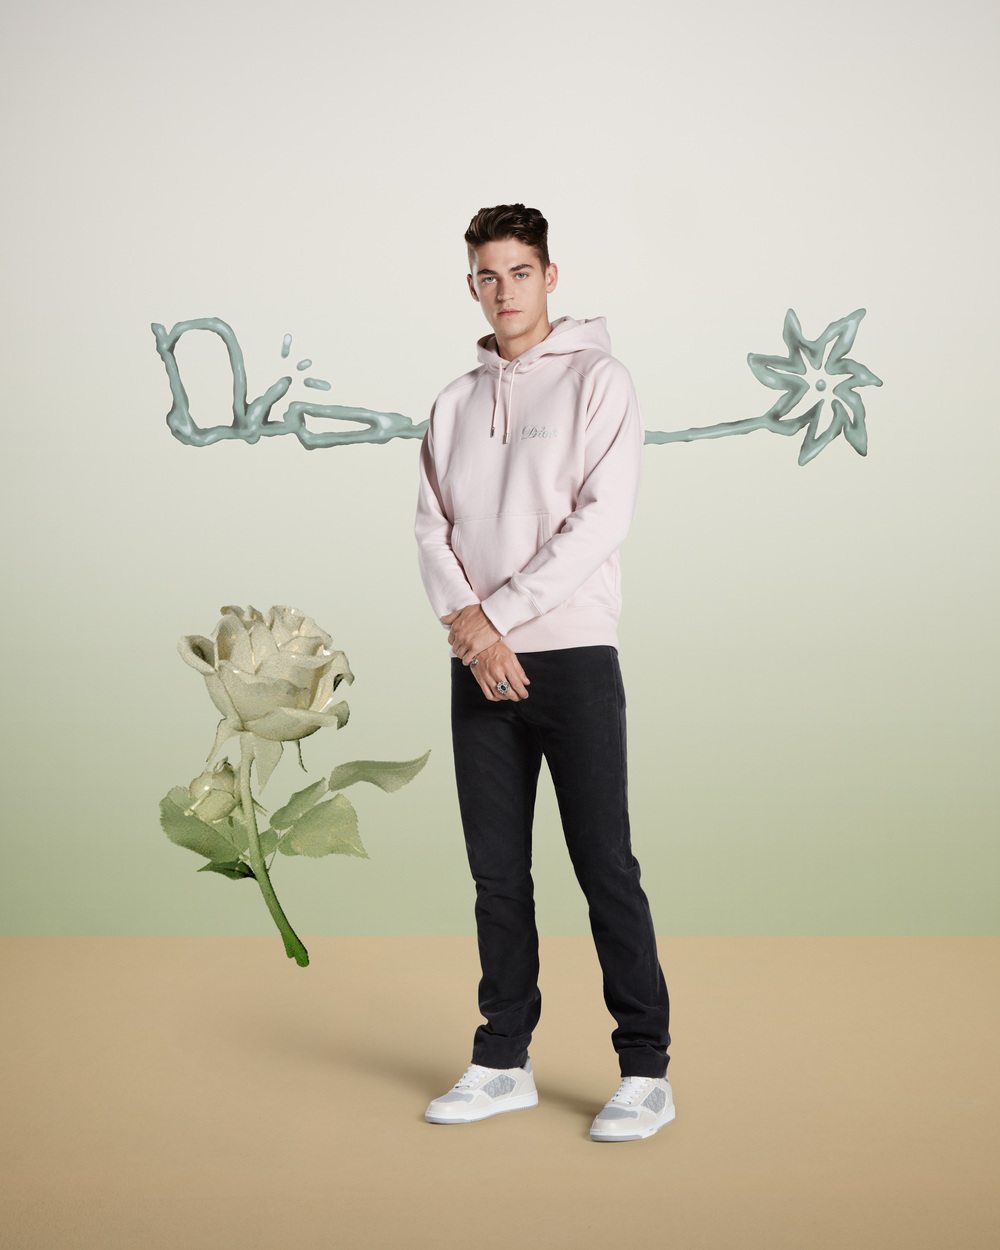 Hero Fiennes Tiffen wearing the Cactus Jack Dior collection 